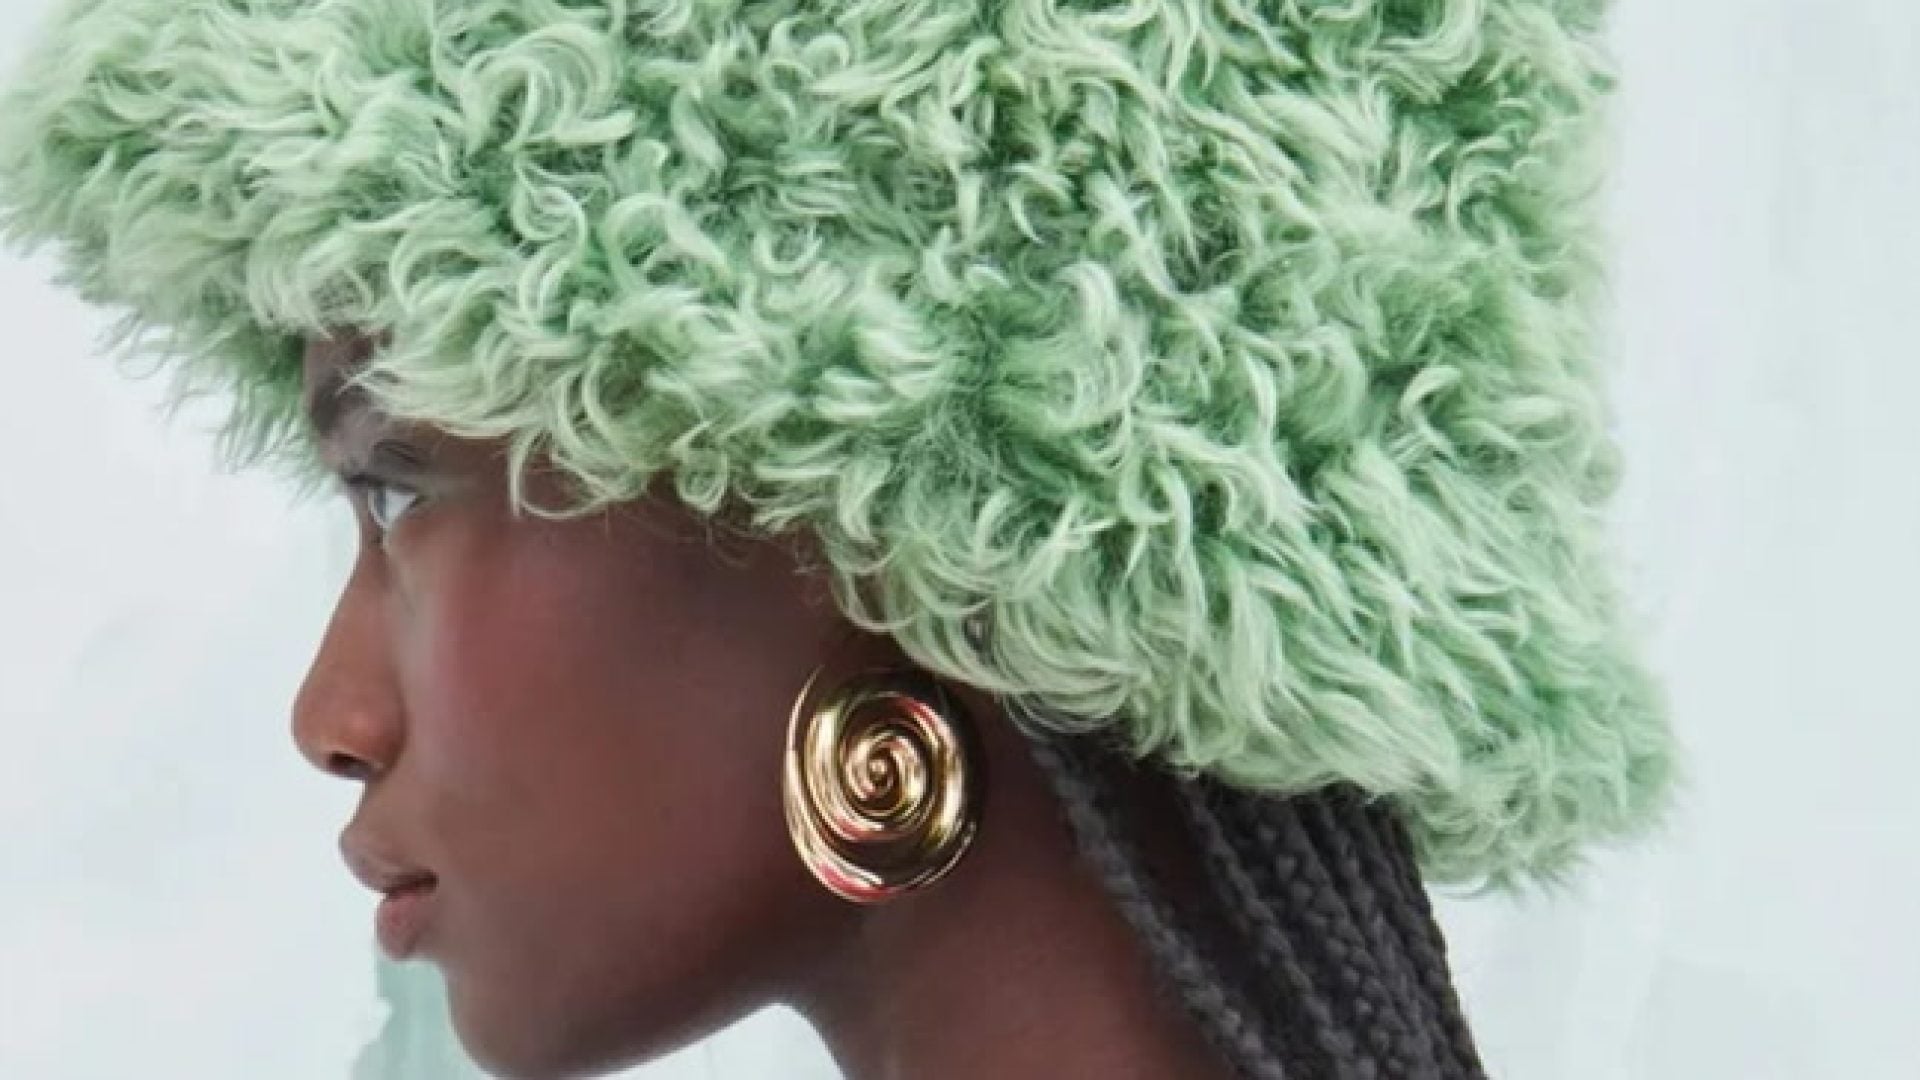 WATCH: In My Feed – Keep Your Head Warm with These Stylish Fur Hats This Season